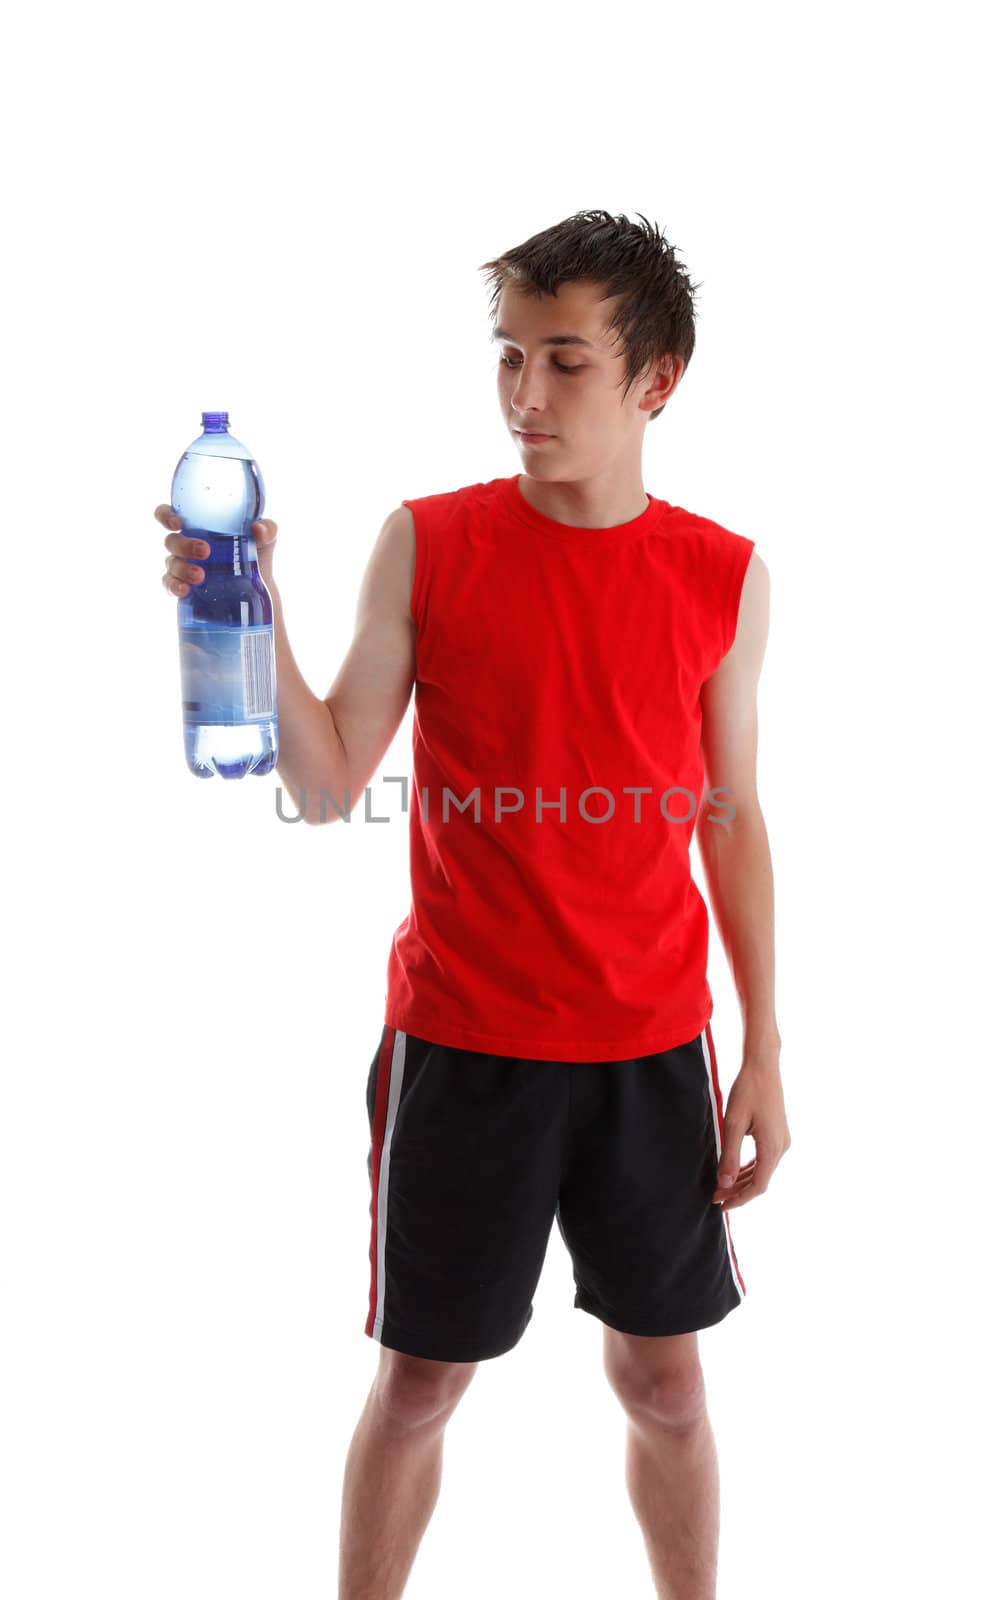 Teenager wearing gym clothes and holding a large bottle of water.  White background.